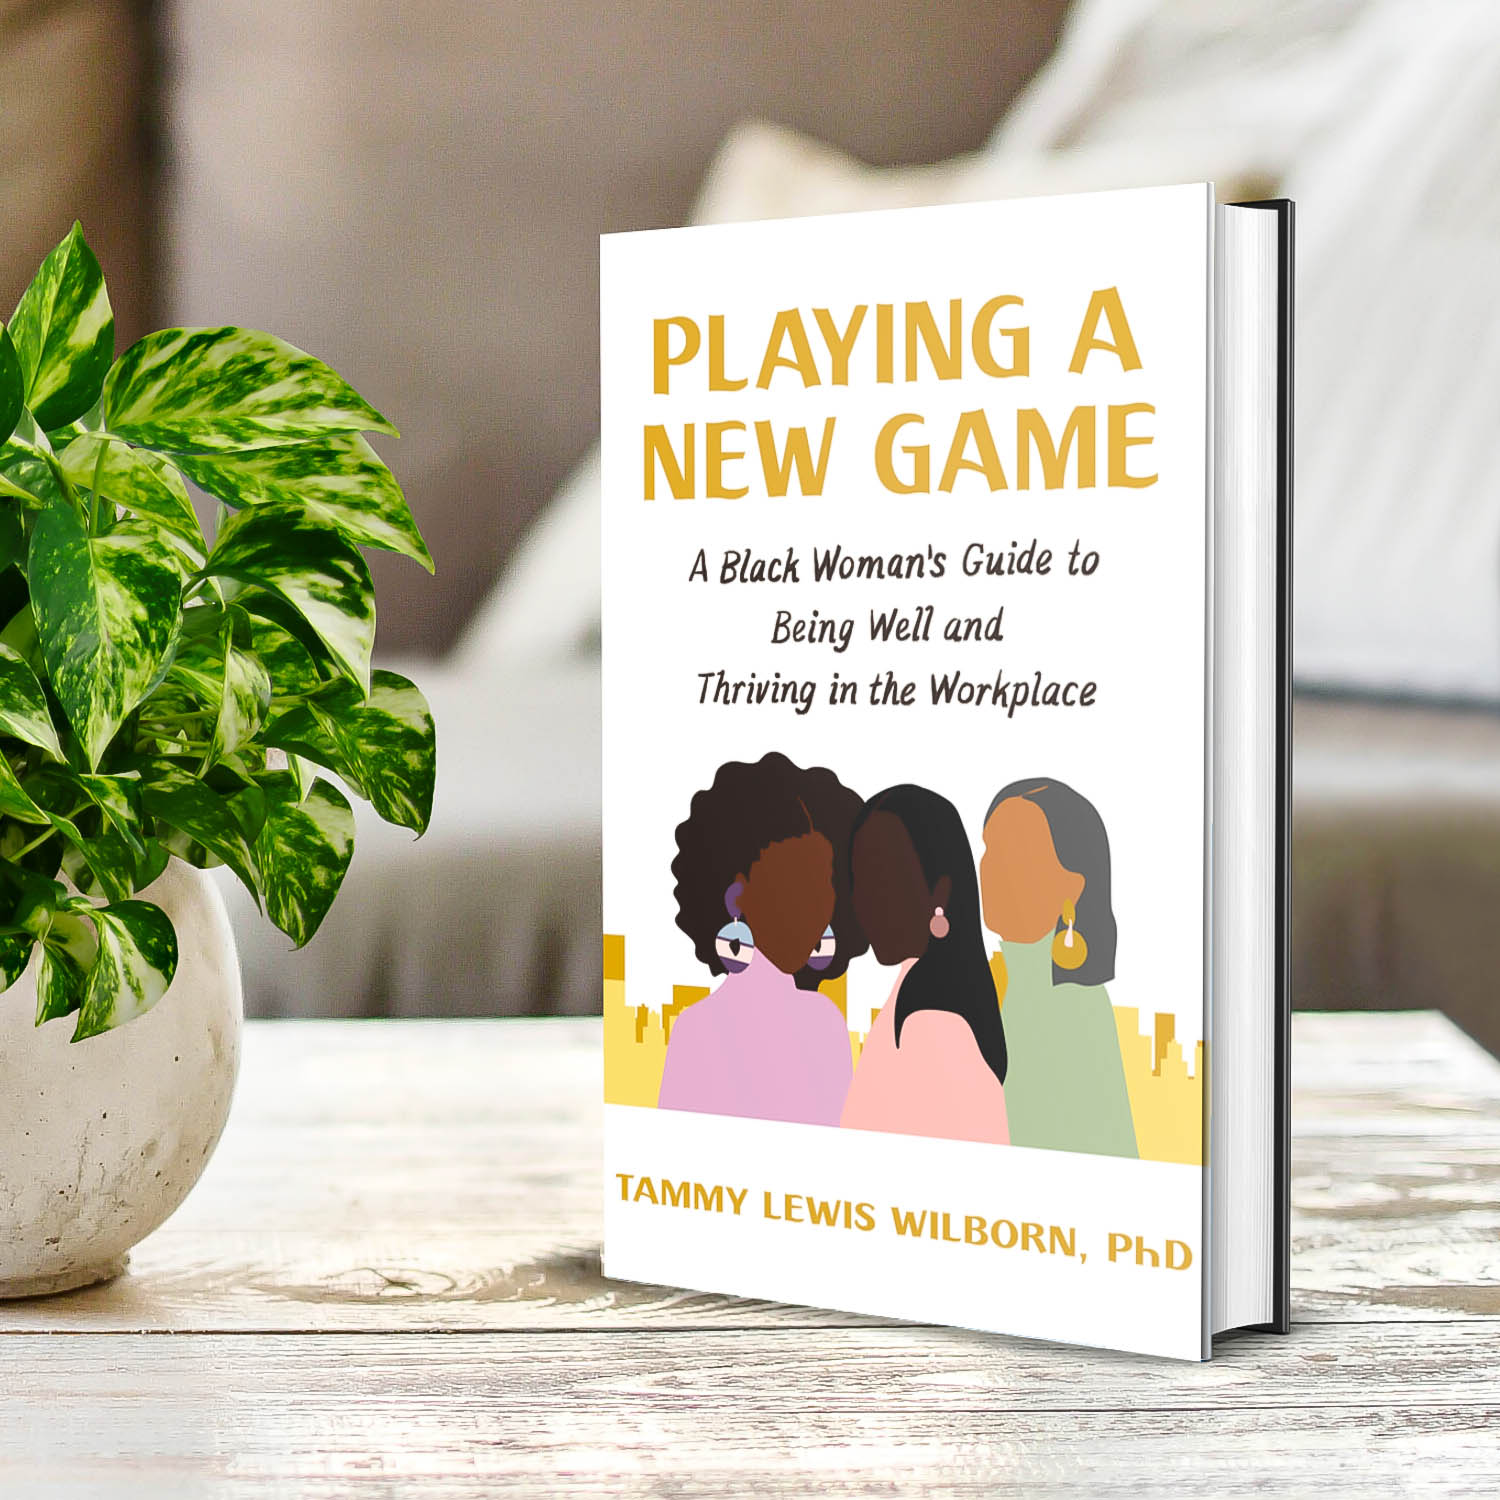 Dr. Tammy Lewiss Wilborn | Playing a New Game: A Black Woman's Guide to Being Well and Thriving in the Workplace